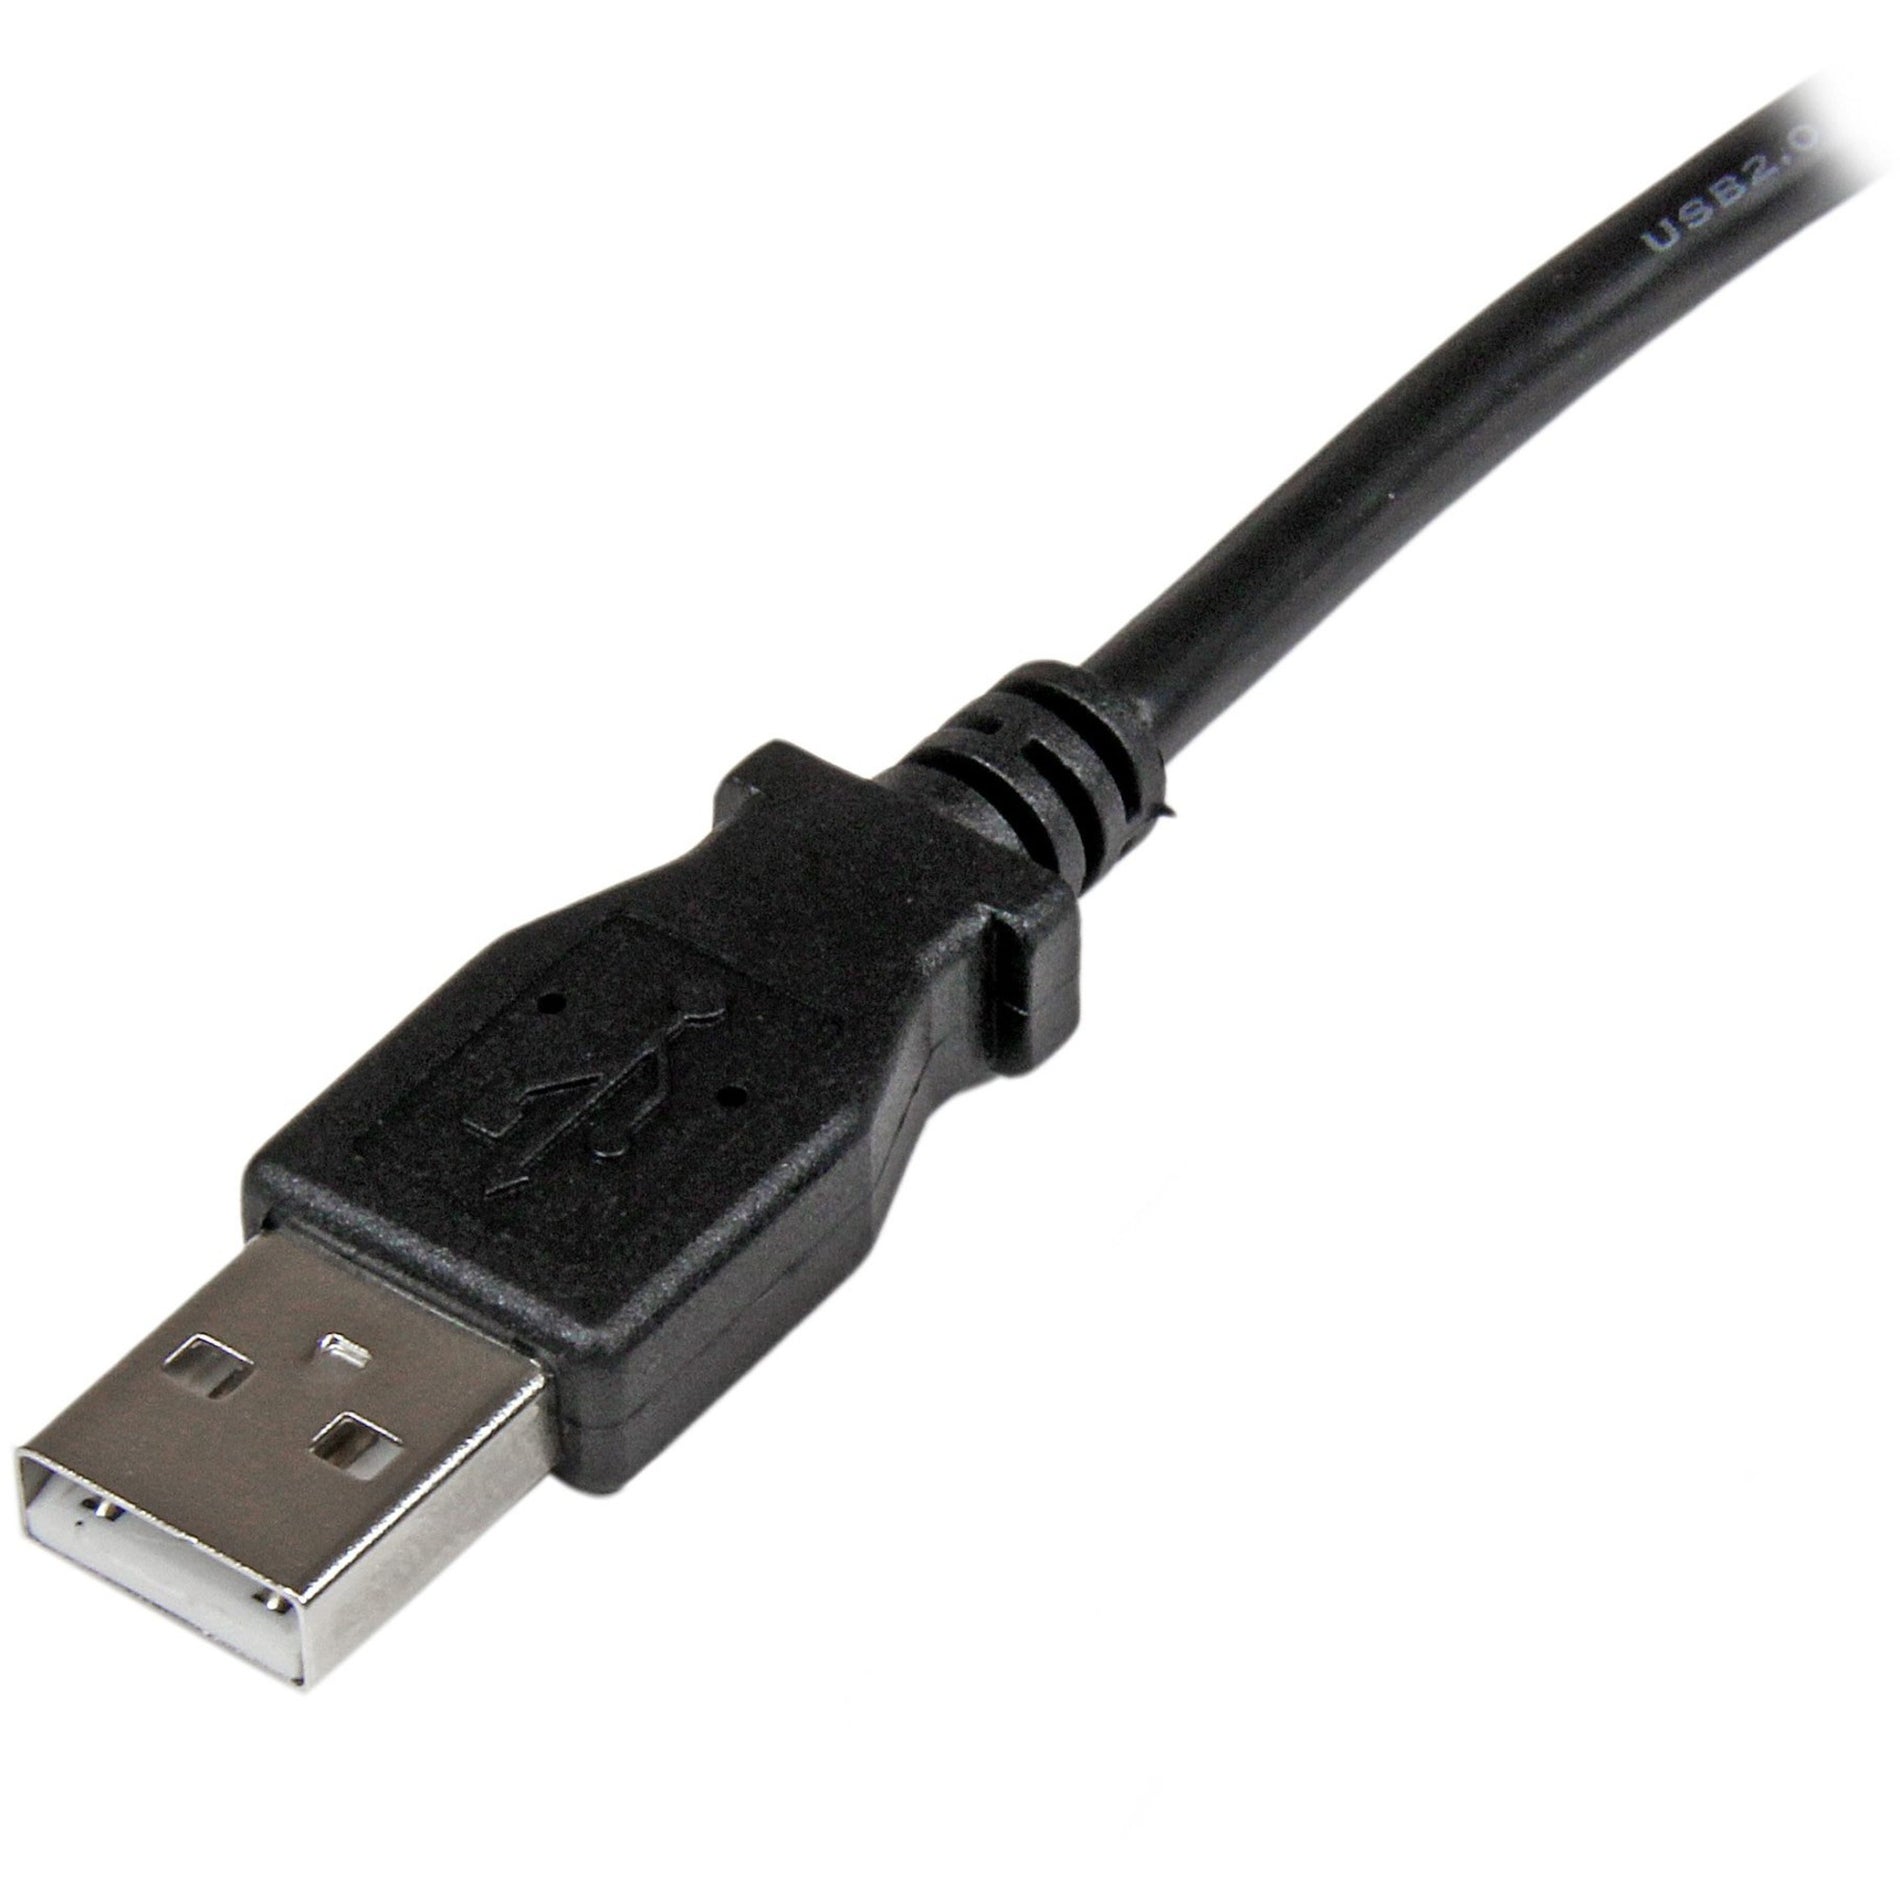 StarTech.com USBAB3ML 3m USB 2.0 A to Left Angle B Cable - M/M, 9.84 ft Data Transfer Cable